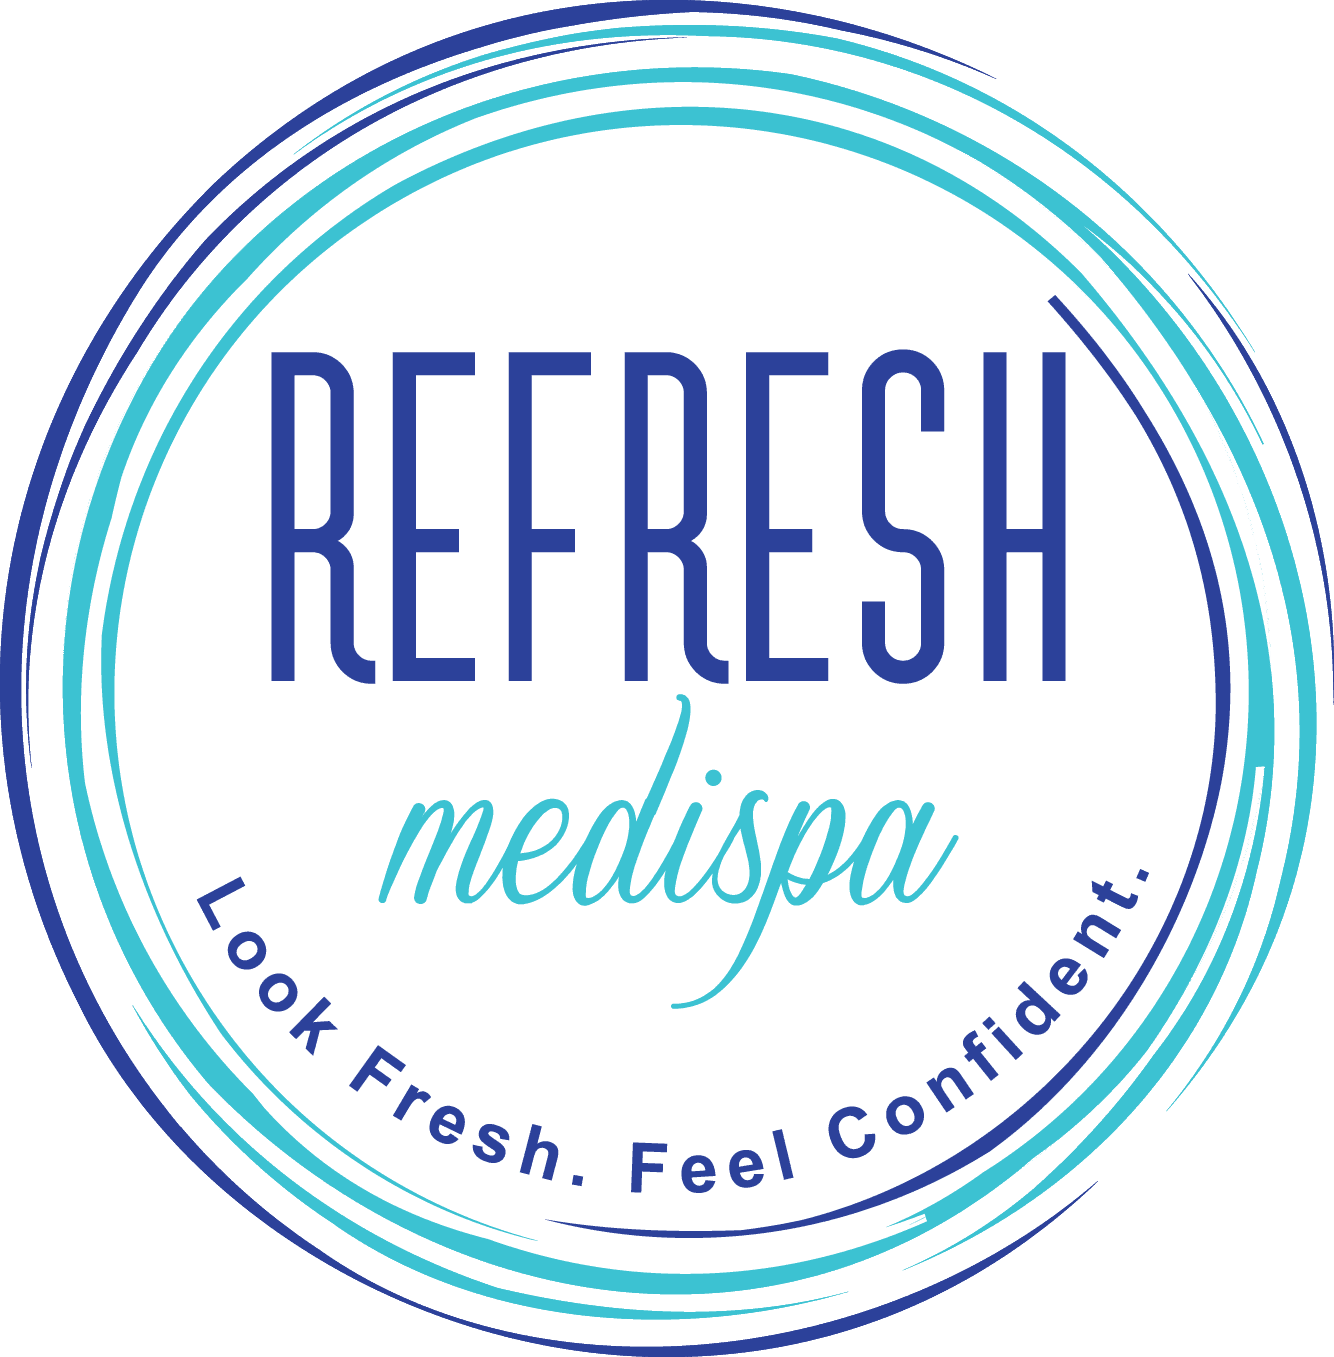 Welcome to Refresh Medispa